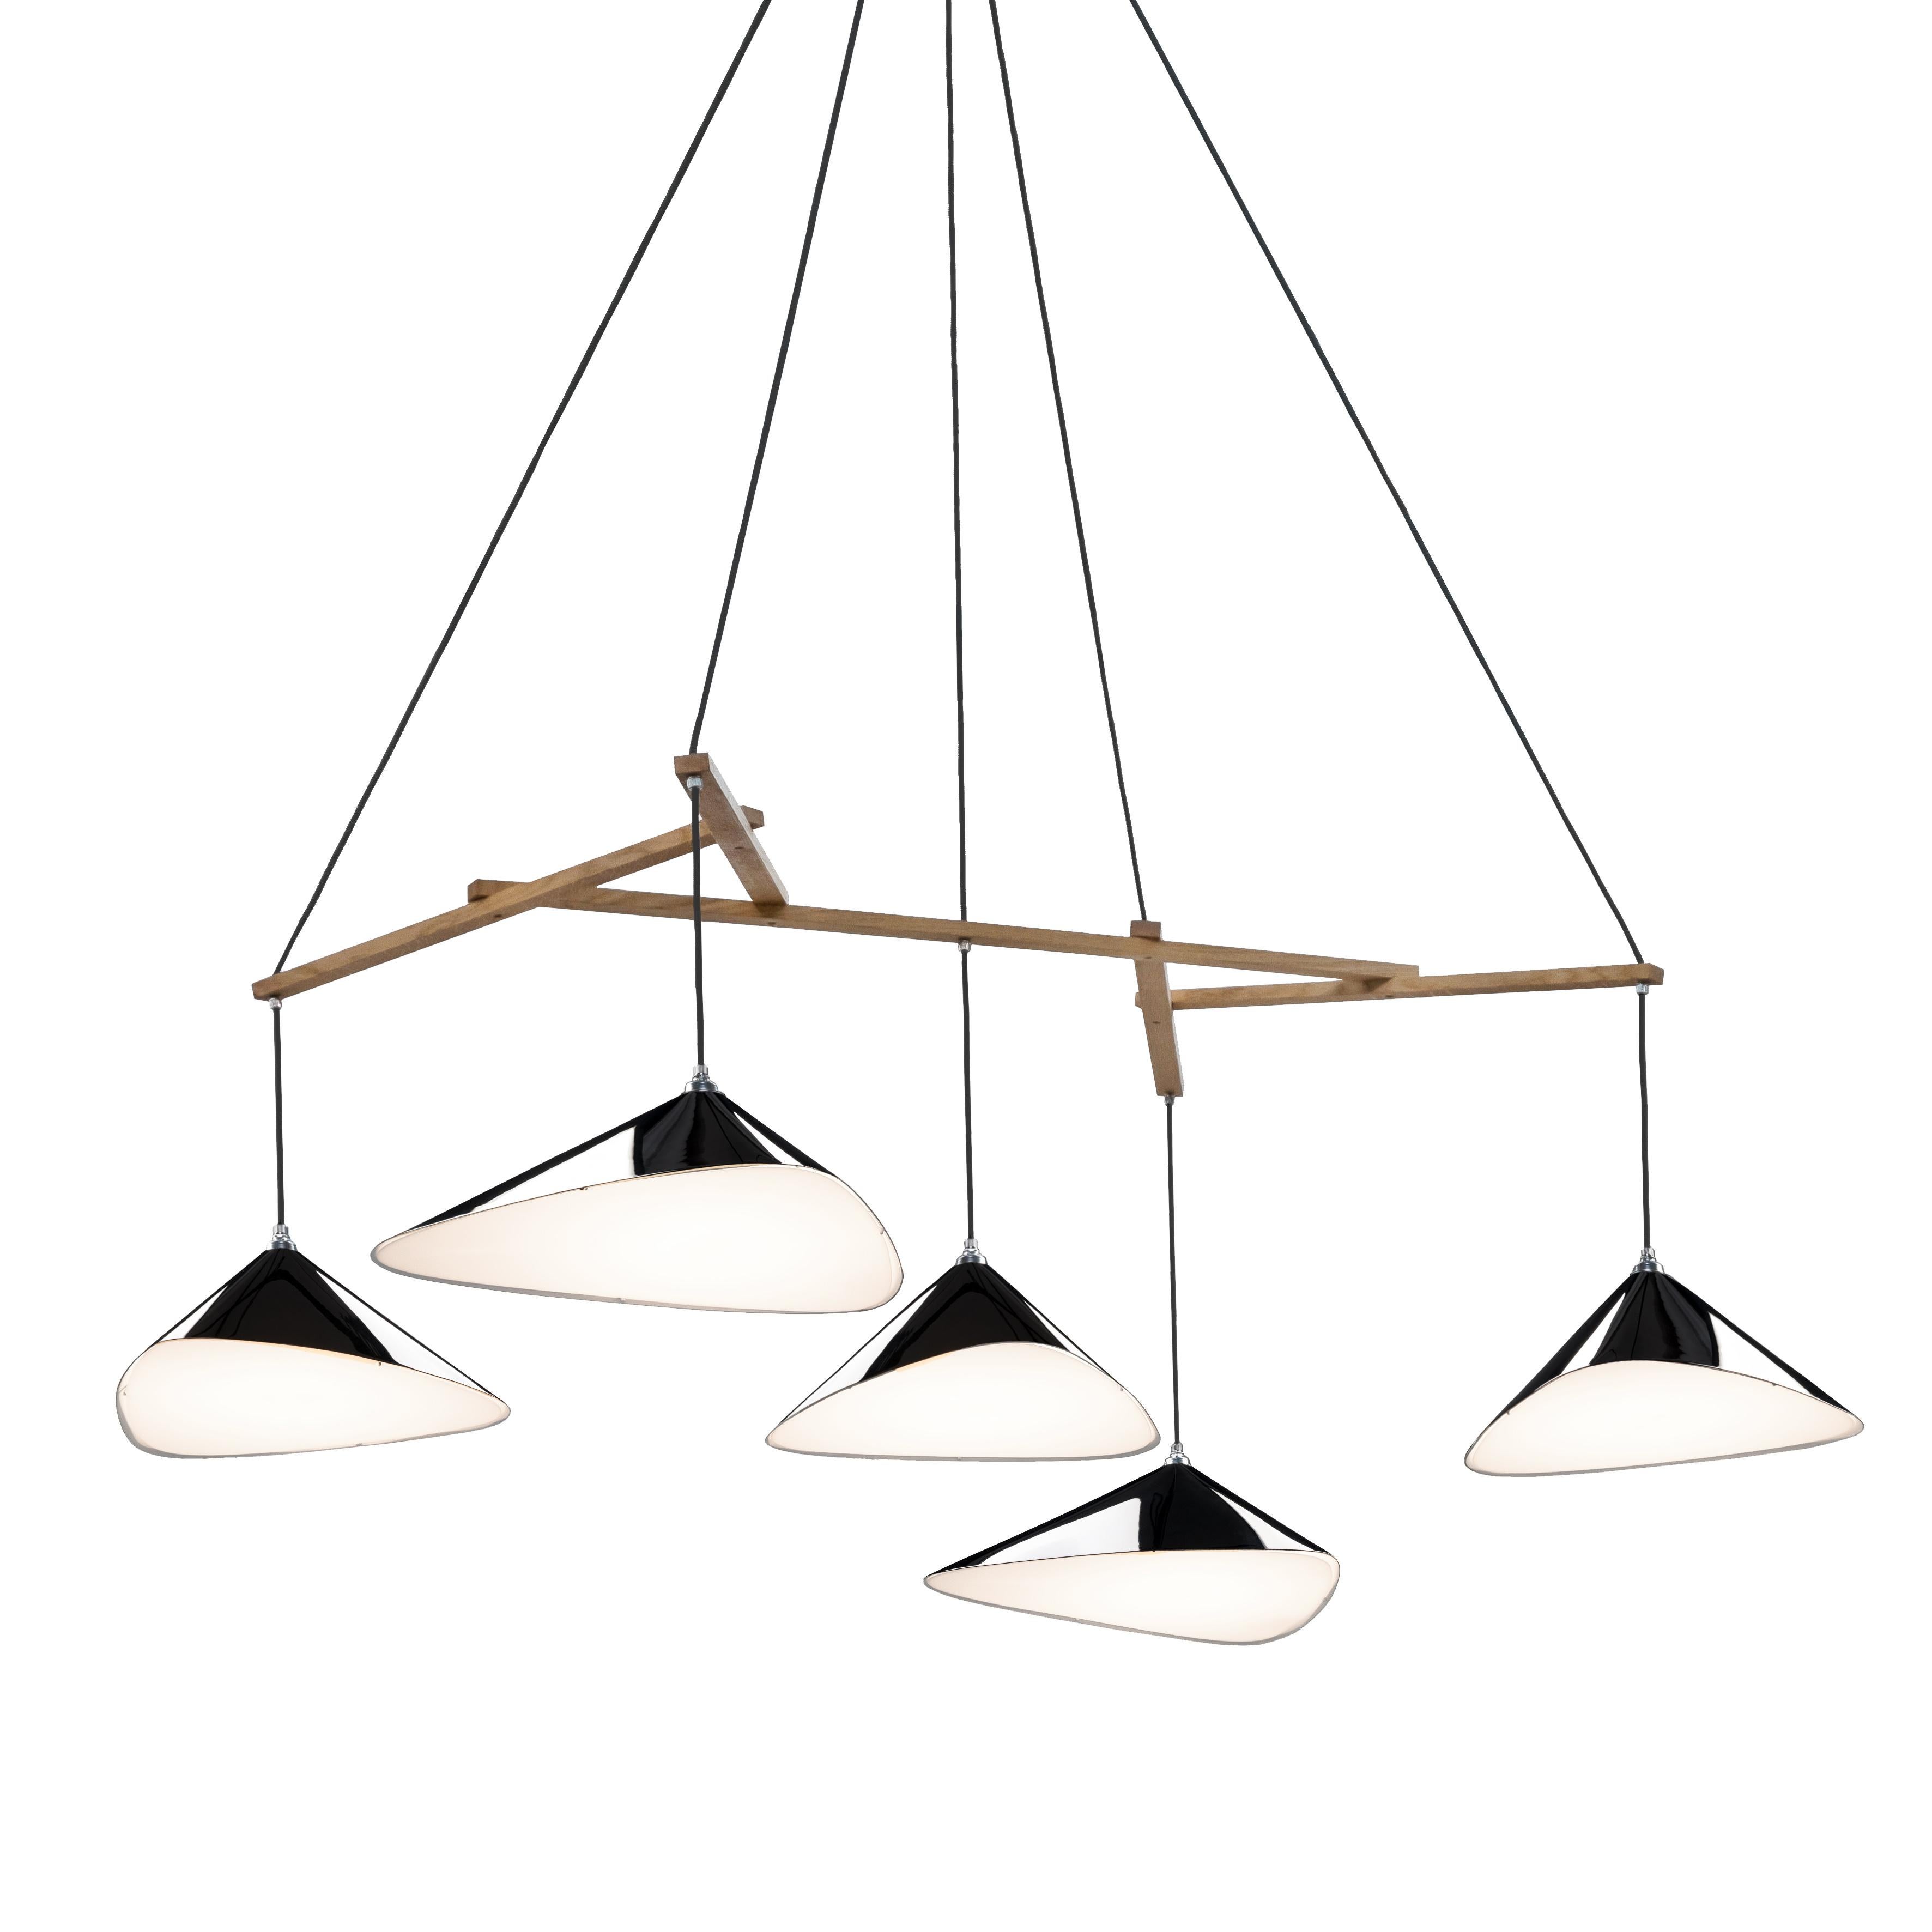 Large Daniel Becker 'Emily 5' Chandelier in Brass and Oak Frame for Moss Objects For Sale 2